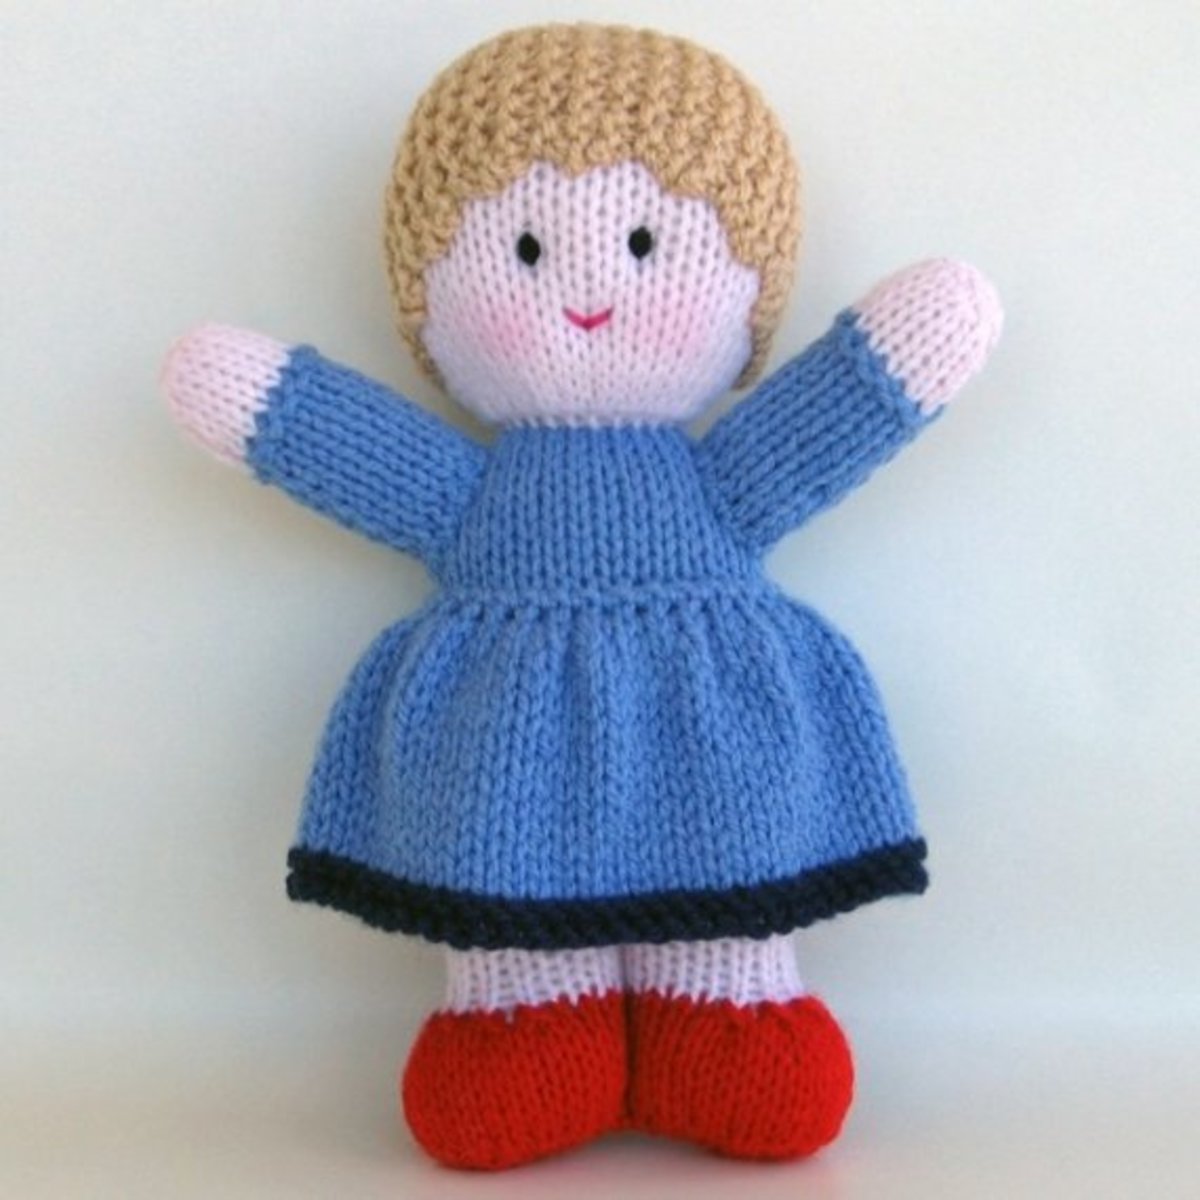 Bluebell, a knitted doll